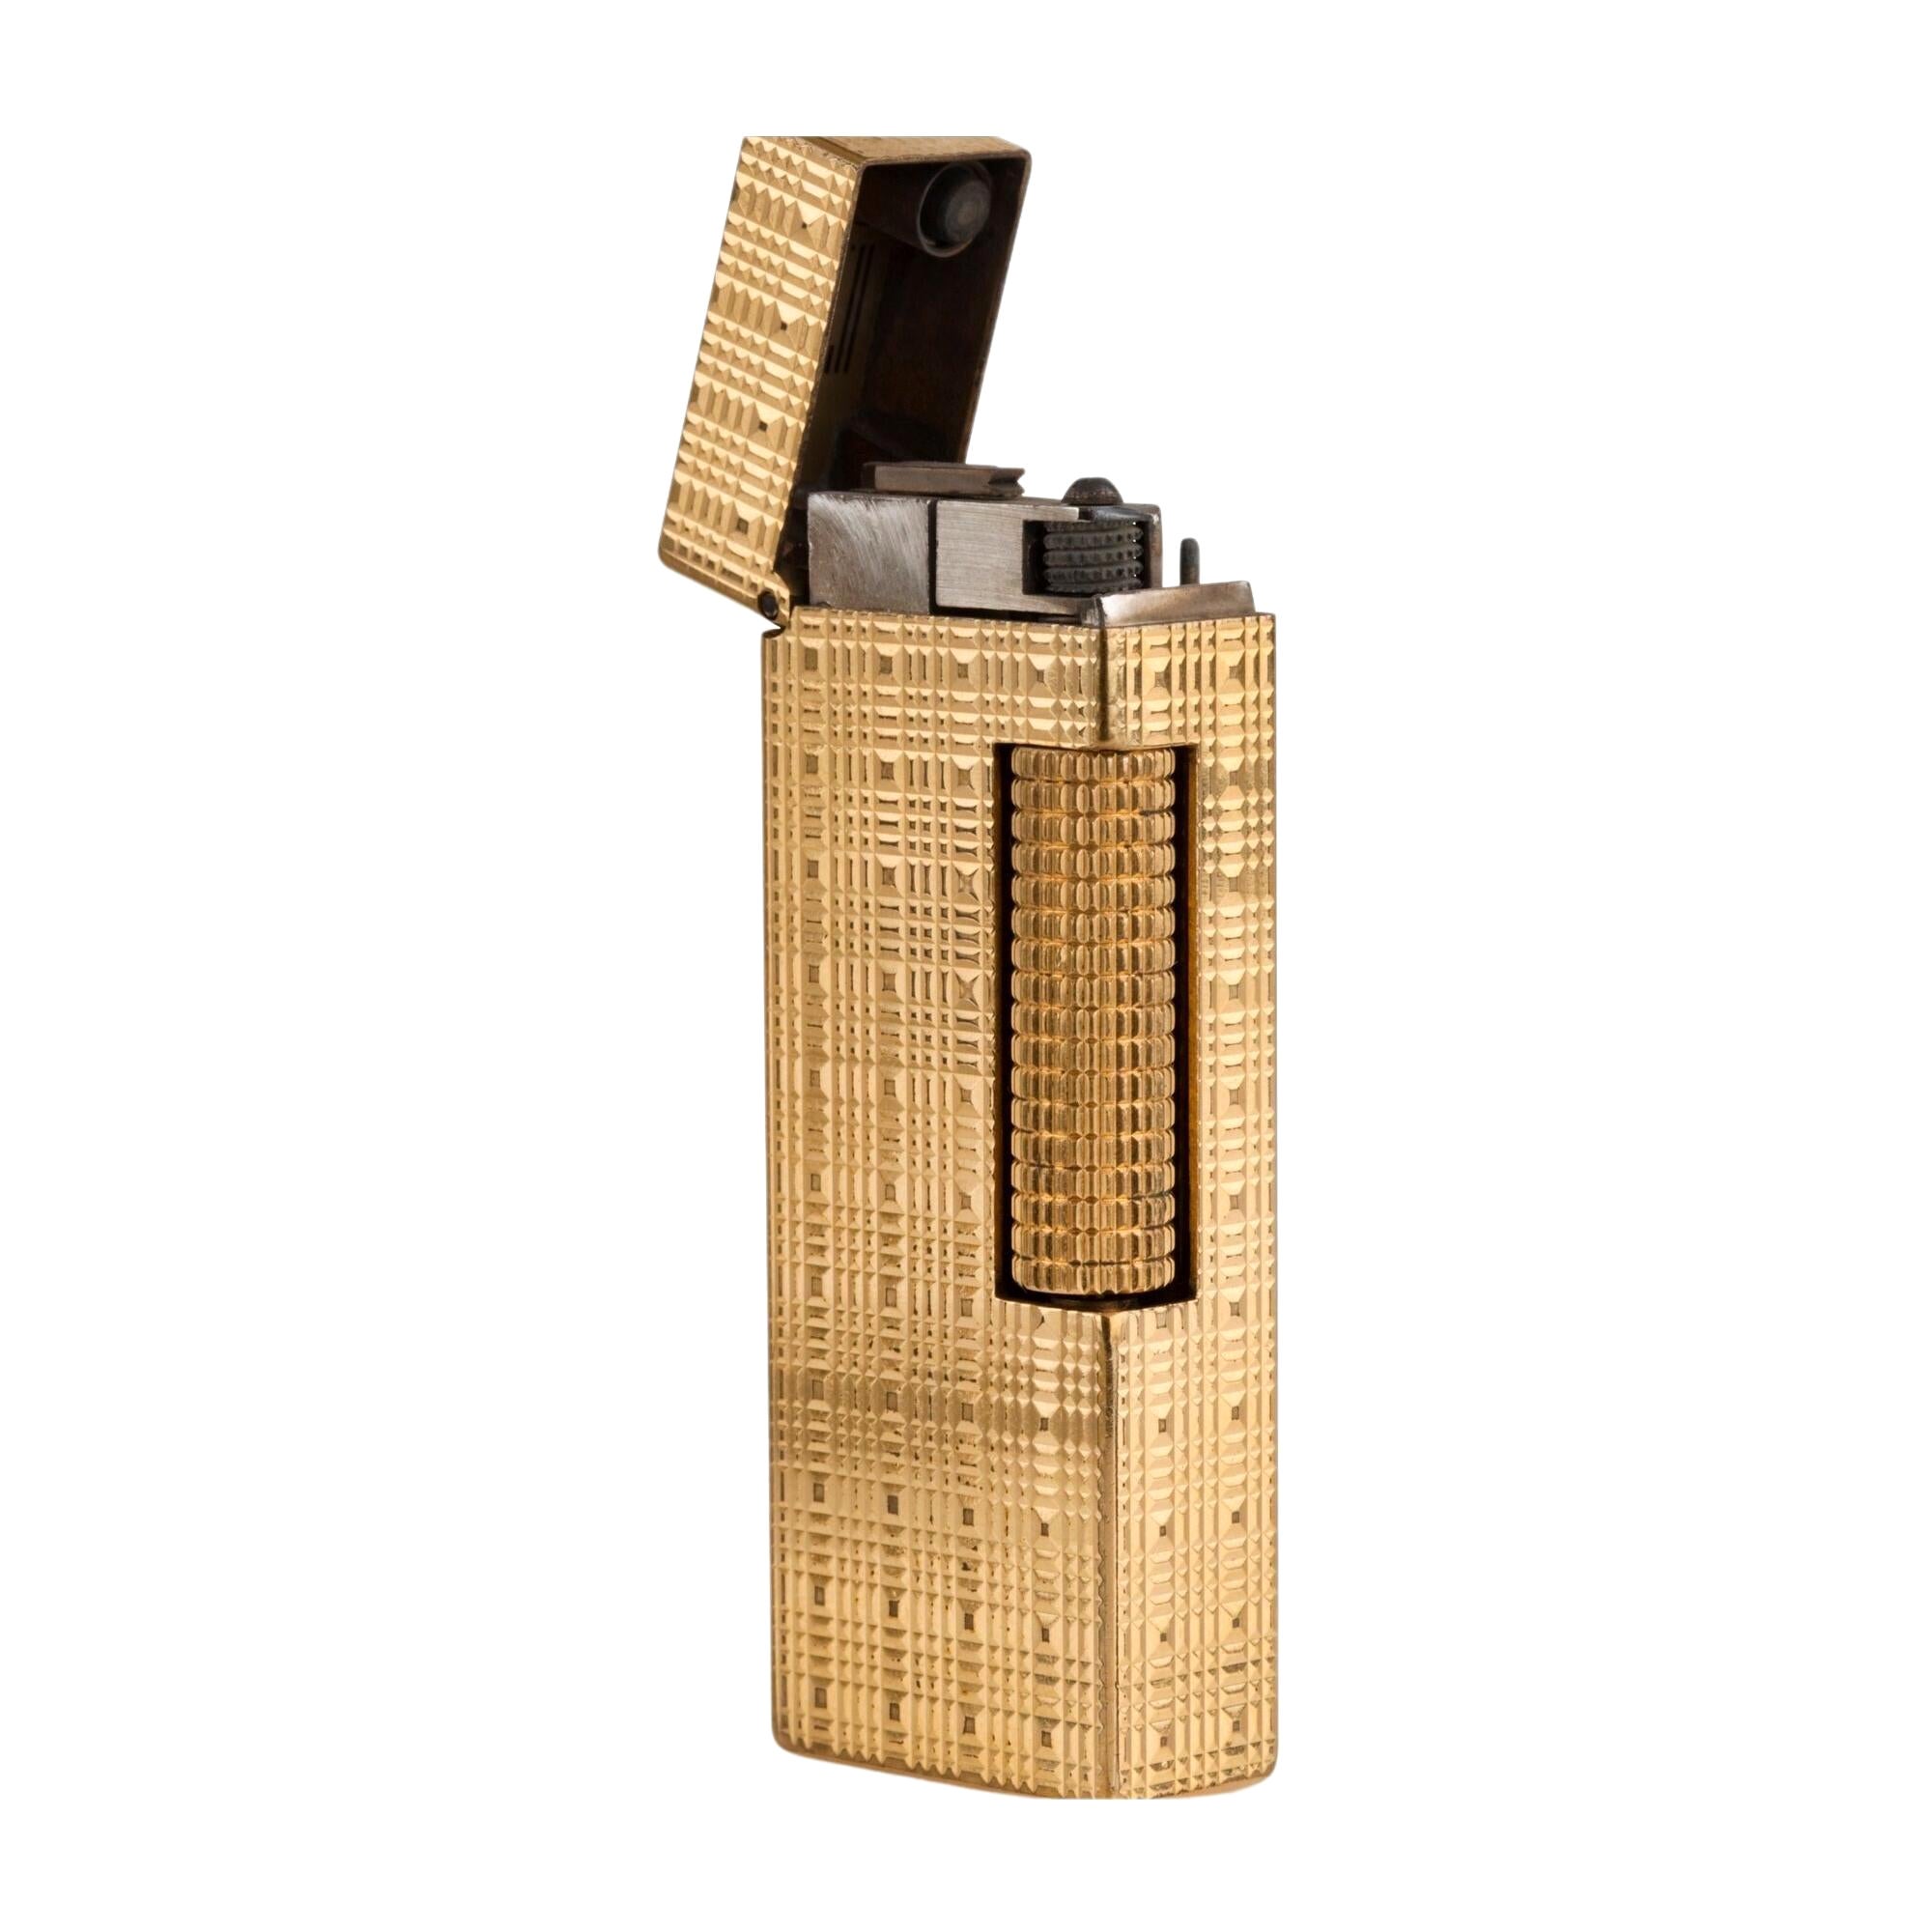 Iconic Dunhill Gold-Plated Cigarette Lighter with original RED lather case 